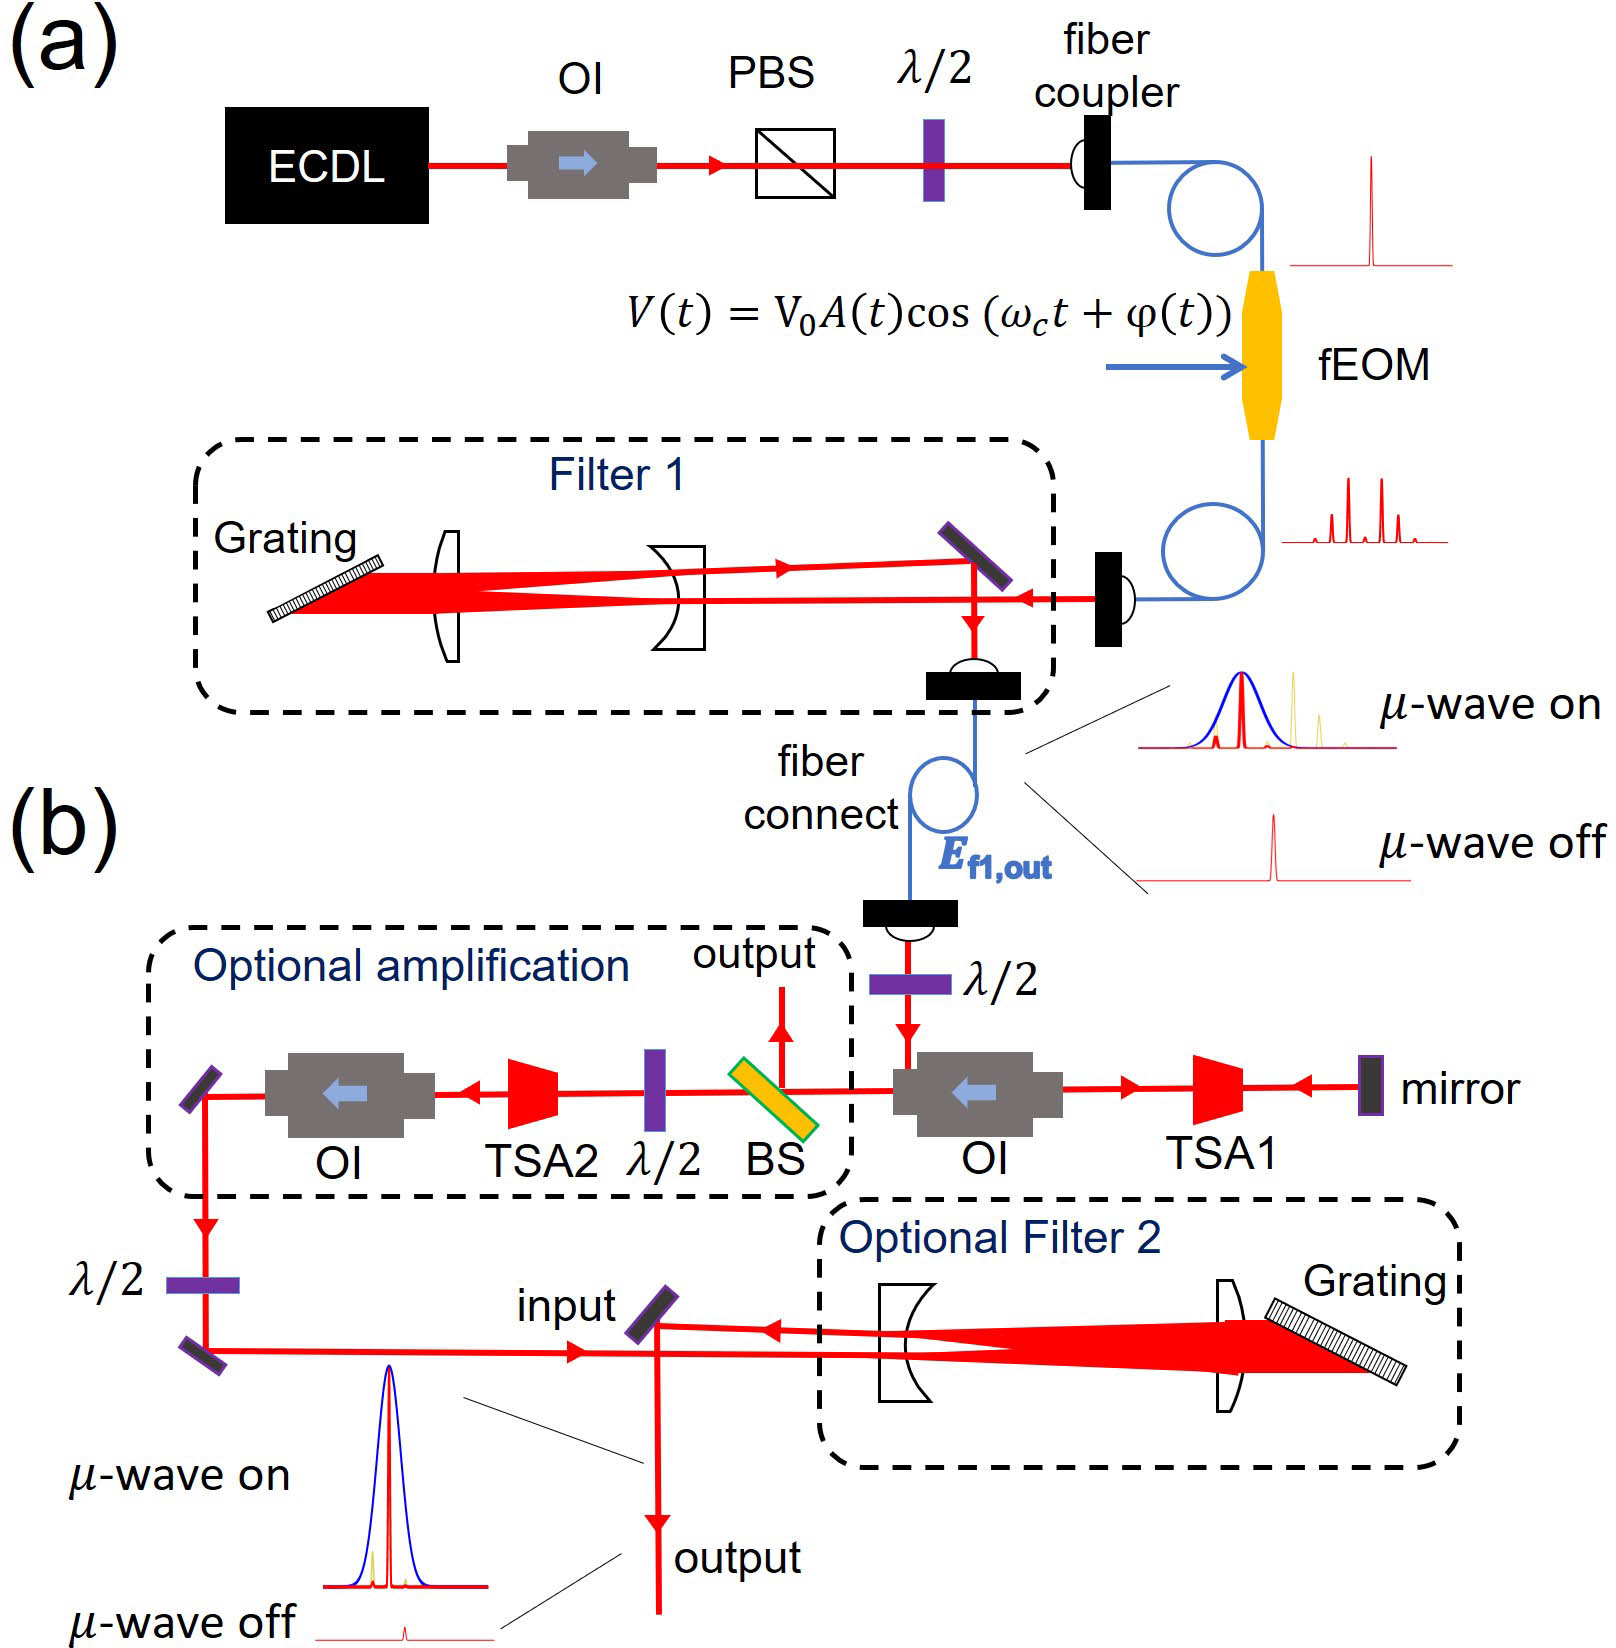 Schematic setup of the waveform generation system. The spectrum of the optical waveform is illustrated at each stage of the amplified modulation. (a) Schematic diagram of fEOM modulation and first optical filtering. CW laser from ECDL is modulated by fEOM with a programmable microwave signal. The fEOM output is collimated into a suitable size and filtered by grating diffraction before being coupled into a single-mode fiber. (b) High-gain optical amplification. TSA1 is seeded from the side port of an optical isolator for double-pass amplification. Optional Filter2 serves to remove the optical carrier from the final output. ECDL, external cavity diode laser; OI, optical isolator; PBS, polarization beamsplitter; BS, beamsplitter.